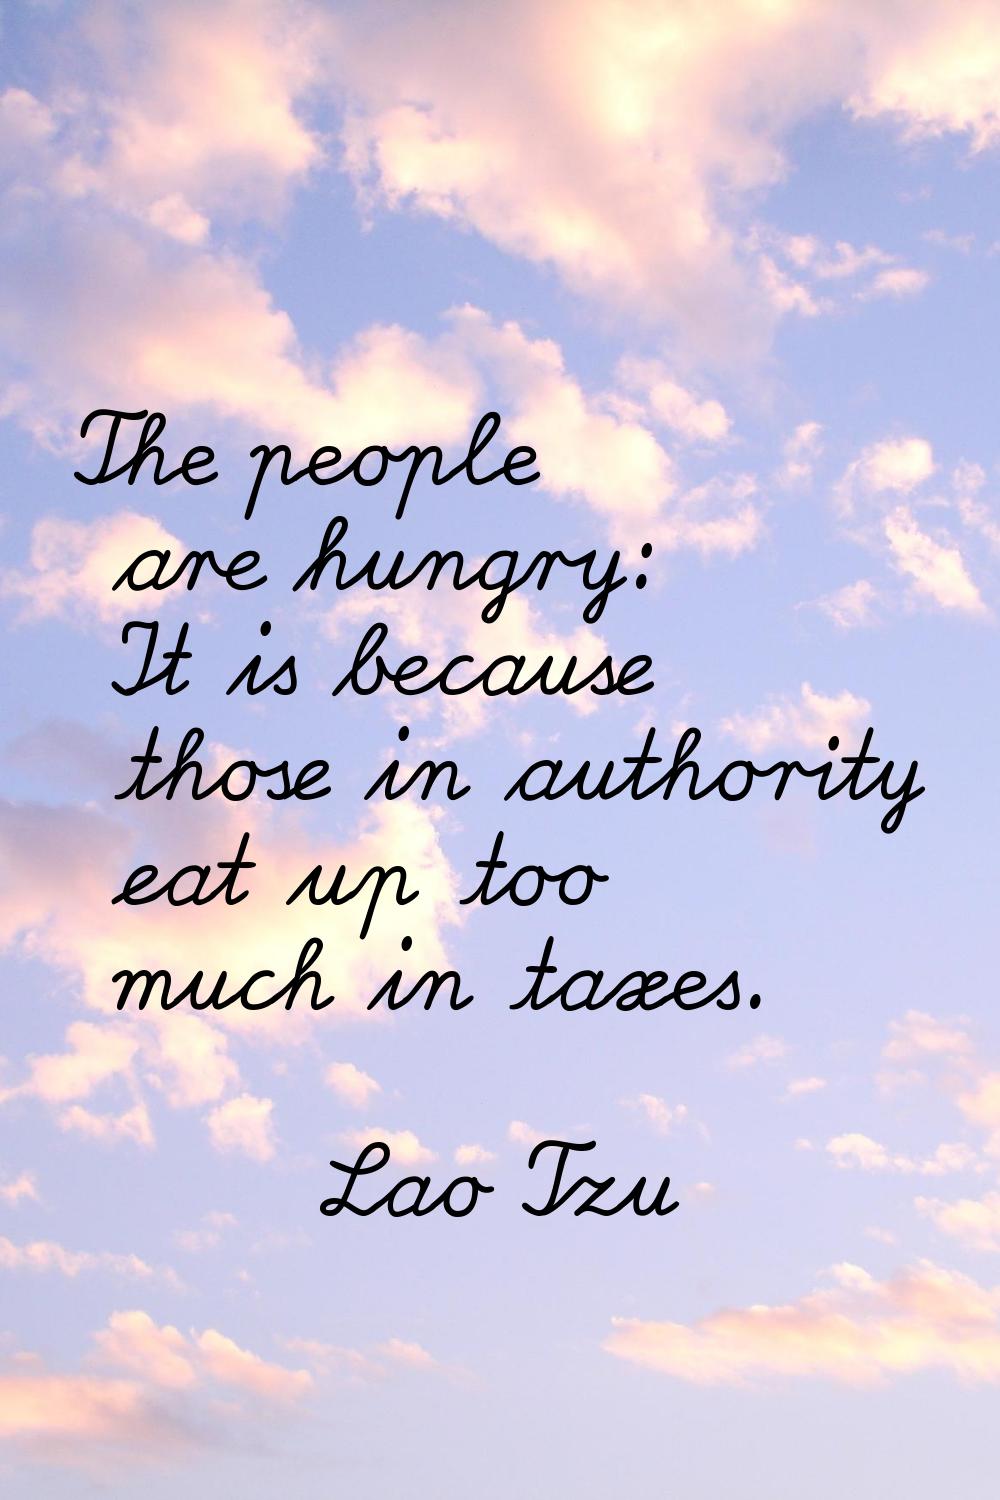 The people are hungry: It is because those in authority eat up too much in taxes.